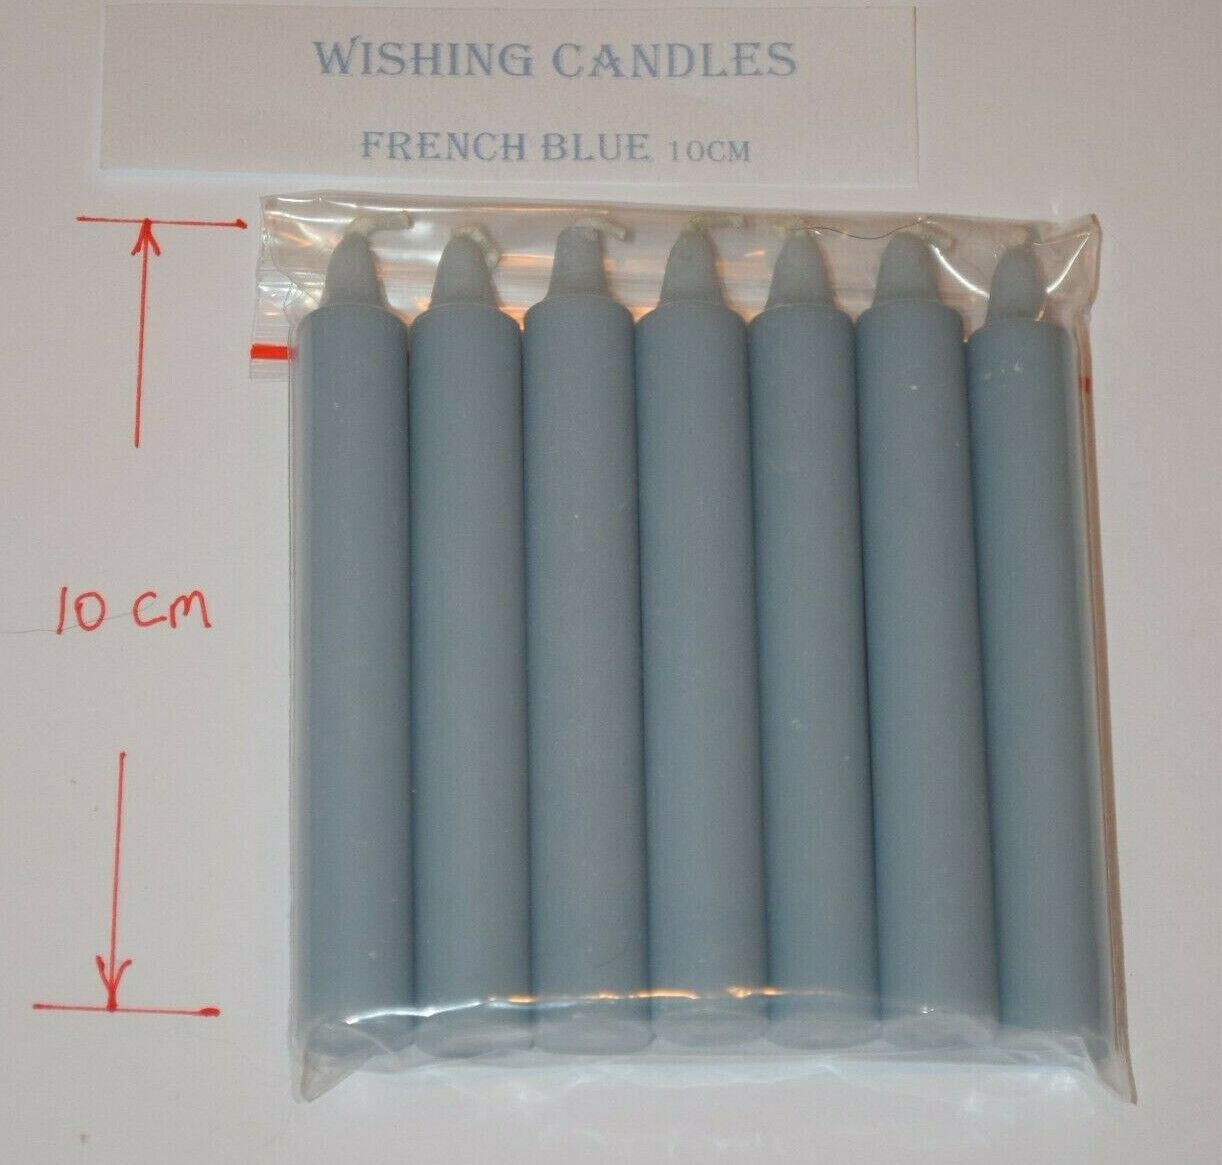 Candles wishing BULK 35 candles Muli Ritual Witch Altar spell chime Holder 10cm BELOW COST